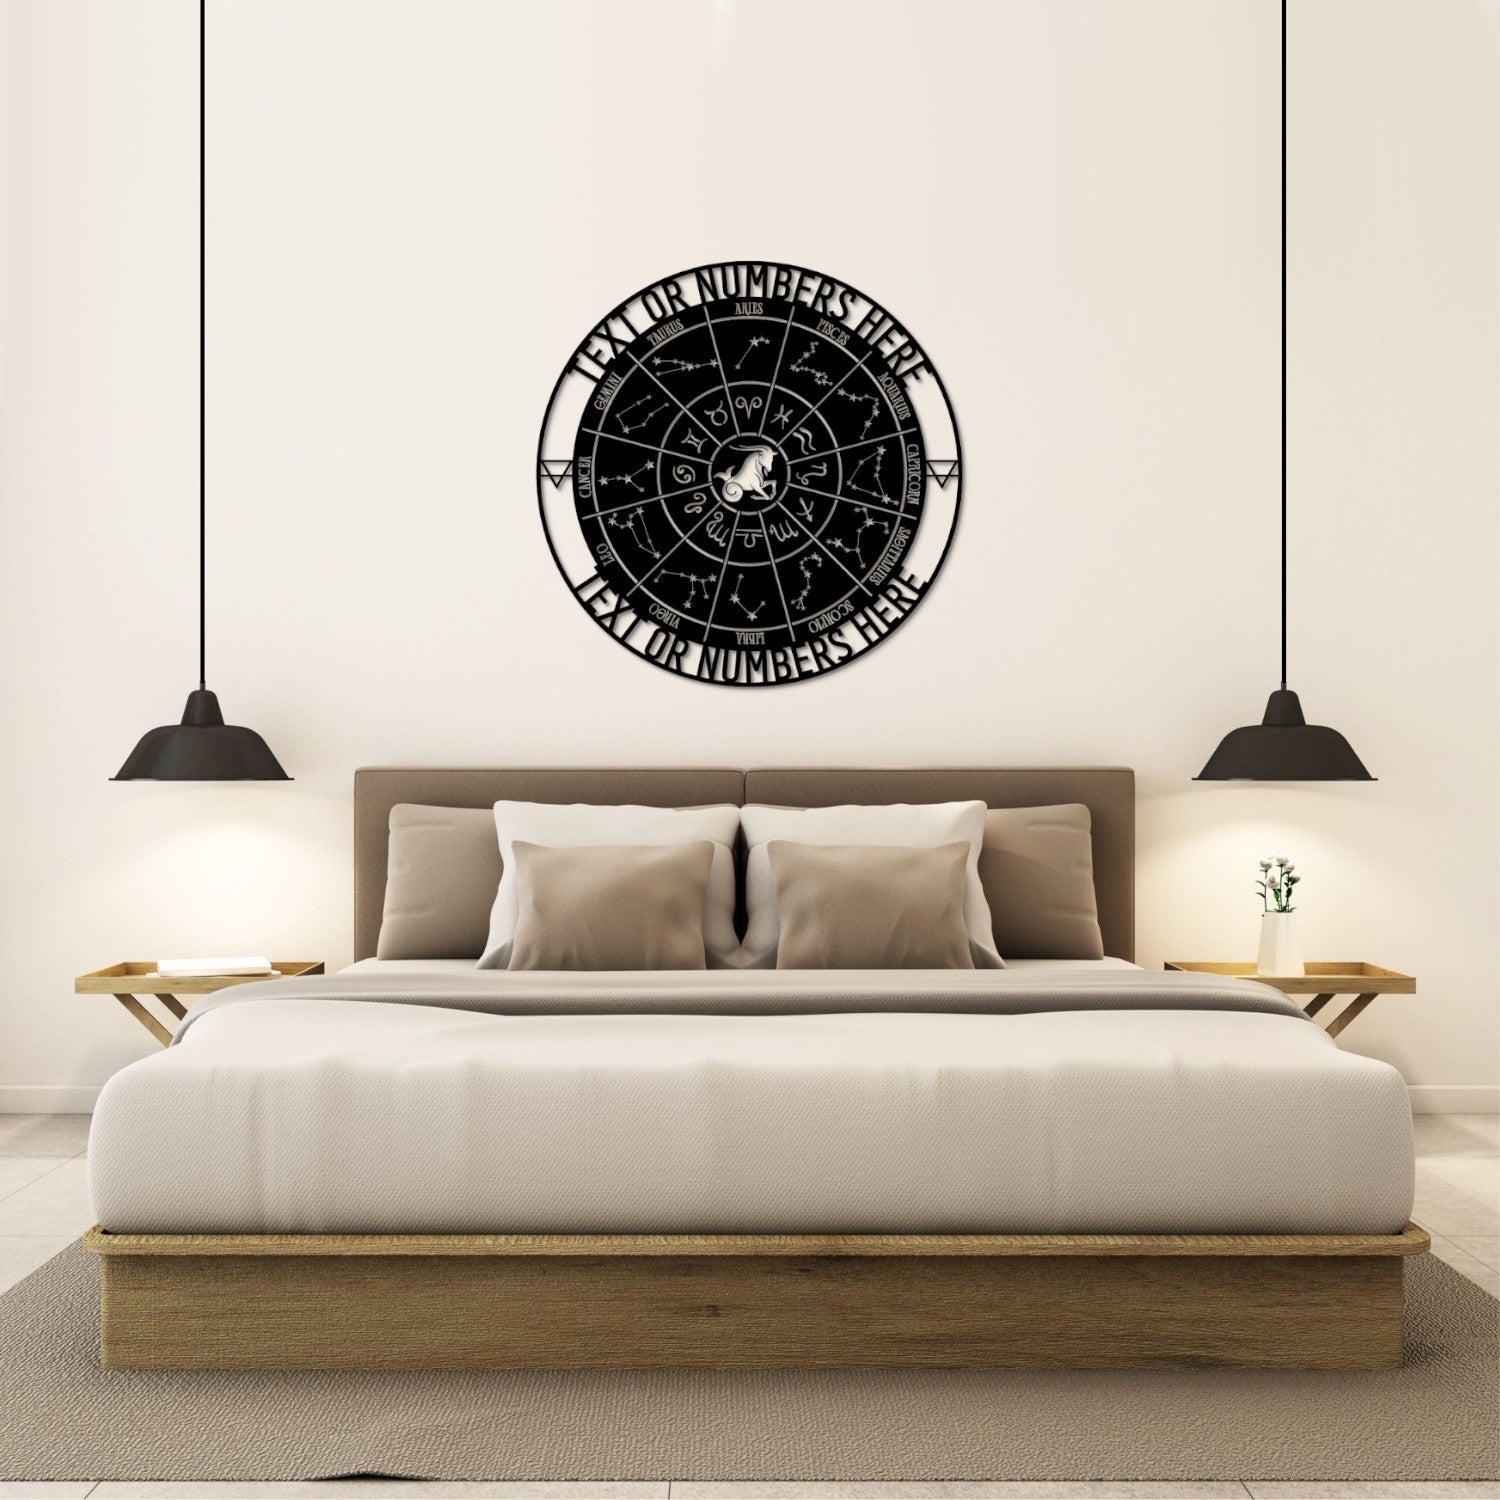 Personalized Capricorn Zodiac Wheel Metal Sign | Custom Made Astrology Wall Decor | Celestial Gifts | Decorative Capricorn Star Sign Hanging